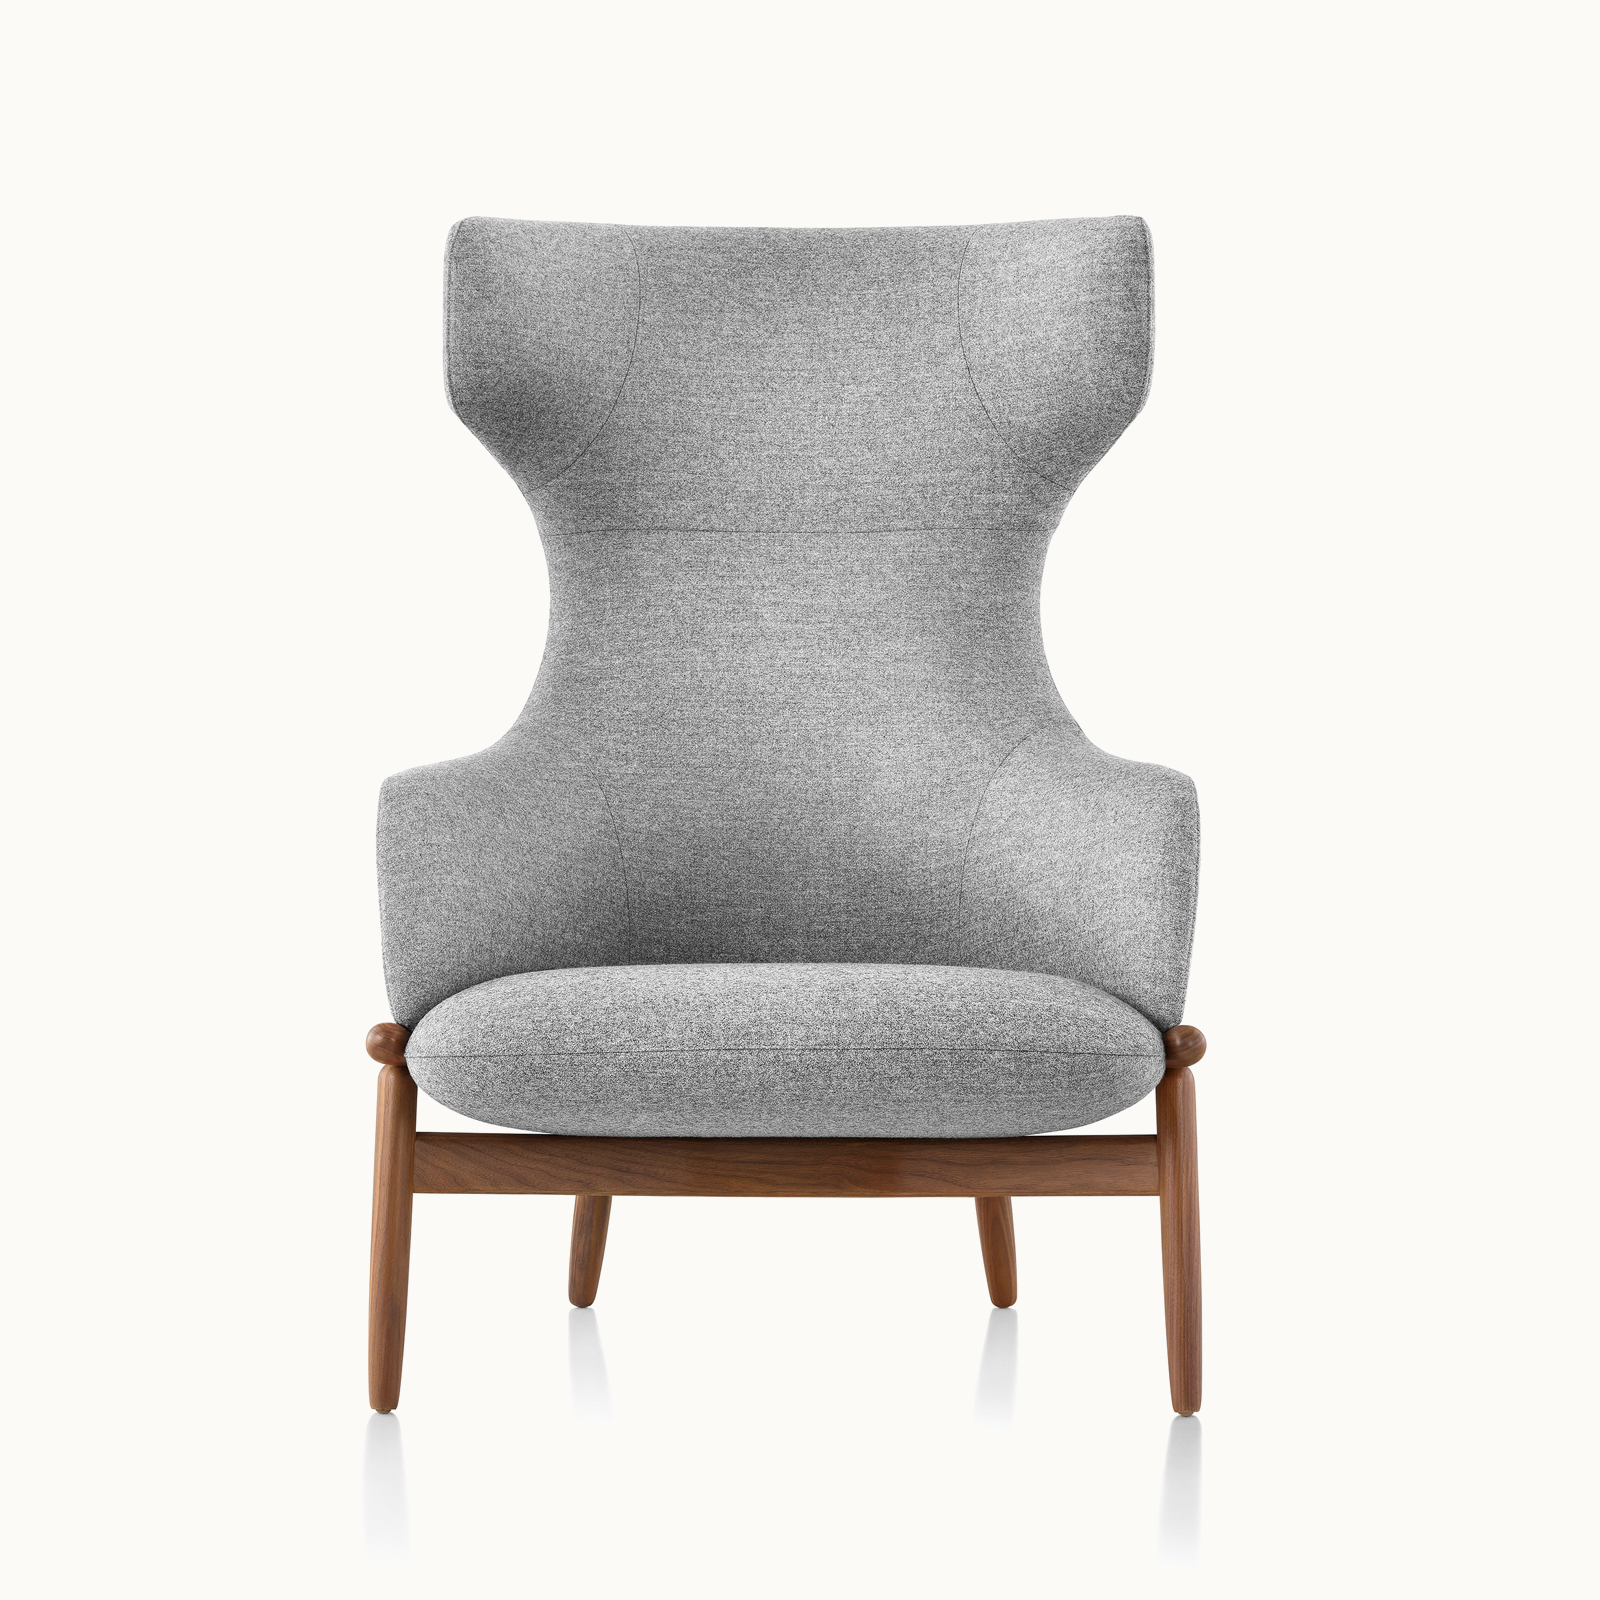 A wing-back Reframe lounge chair with light gray upholstery and a wood frame in a medium finish, viewed from the front.